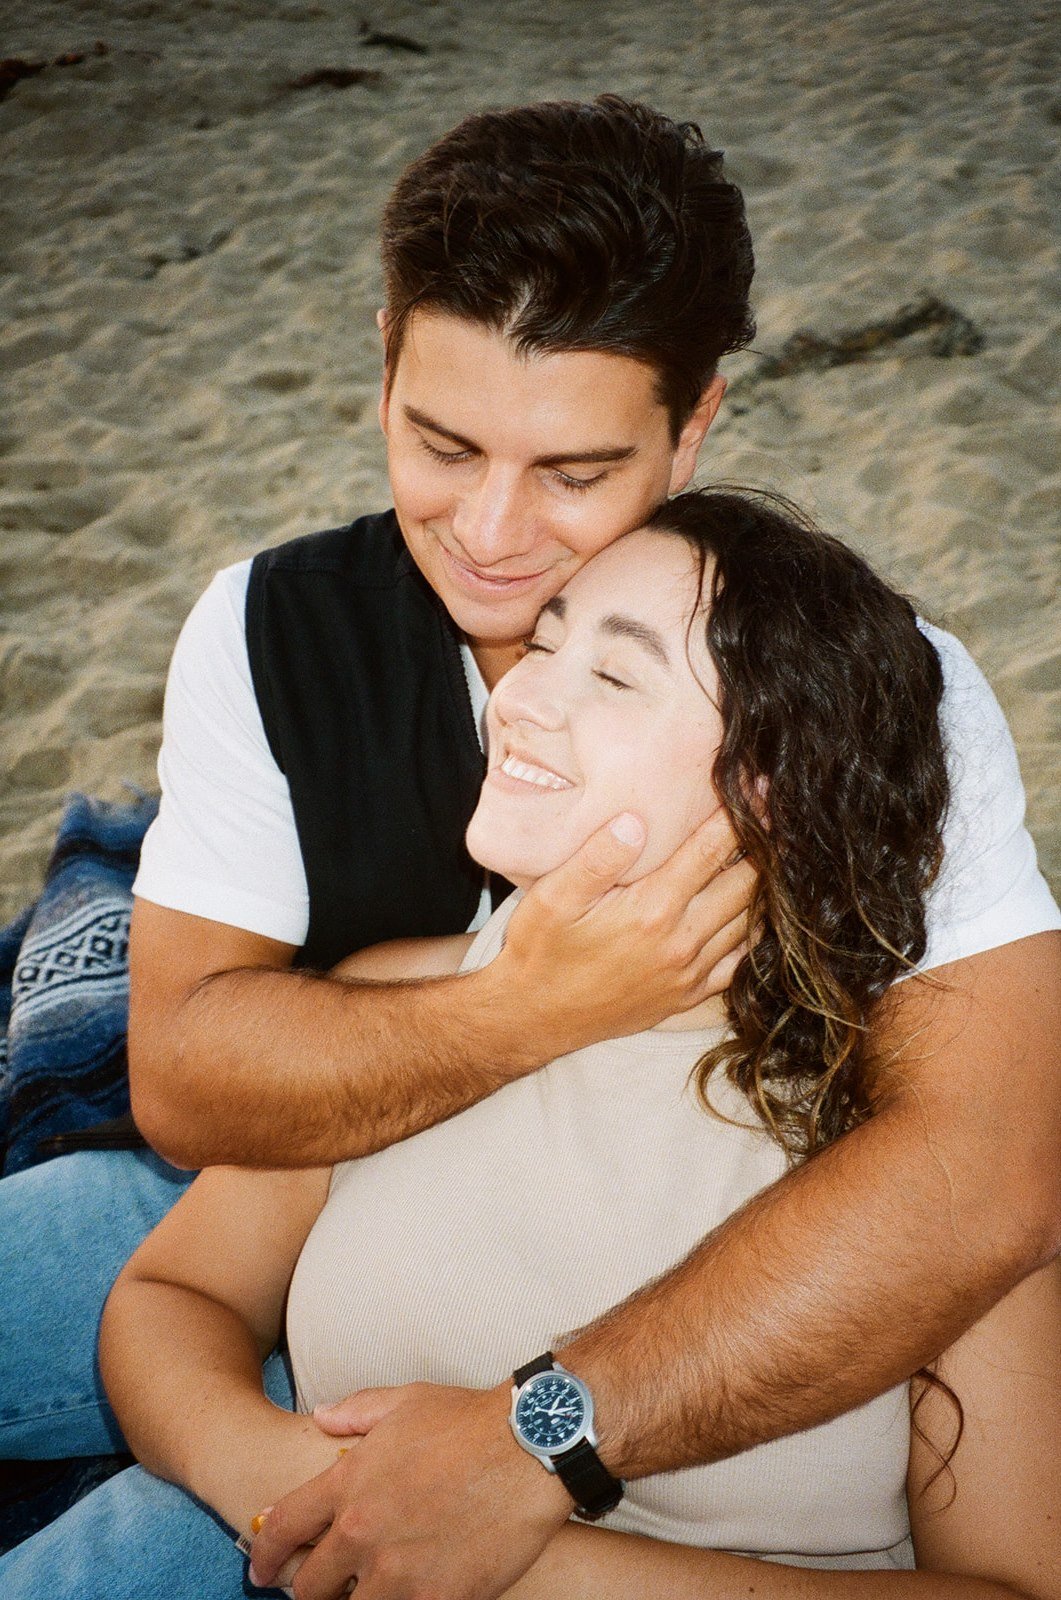 Newport Beach engagement photo session with cute couple during golden hour on film